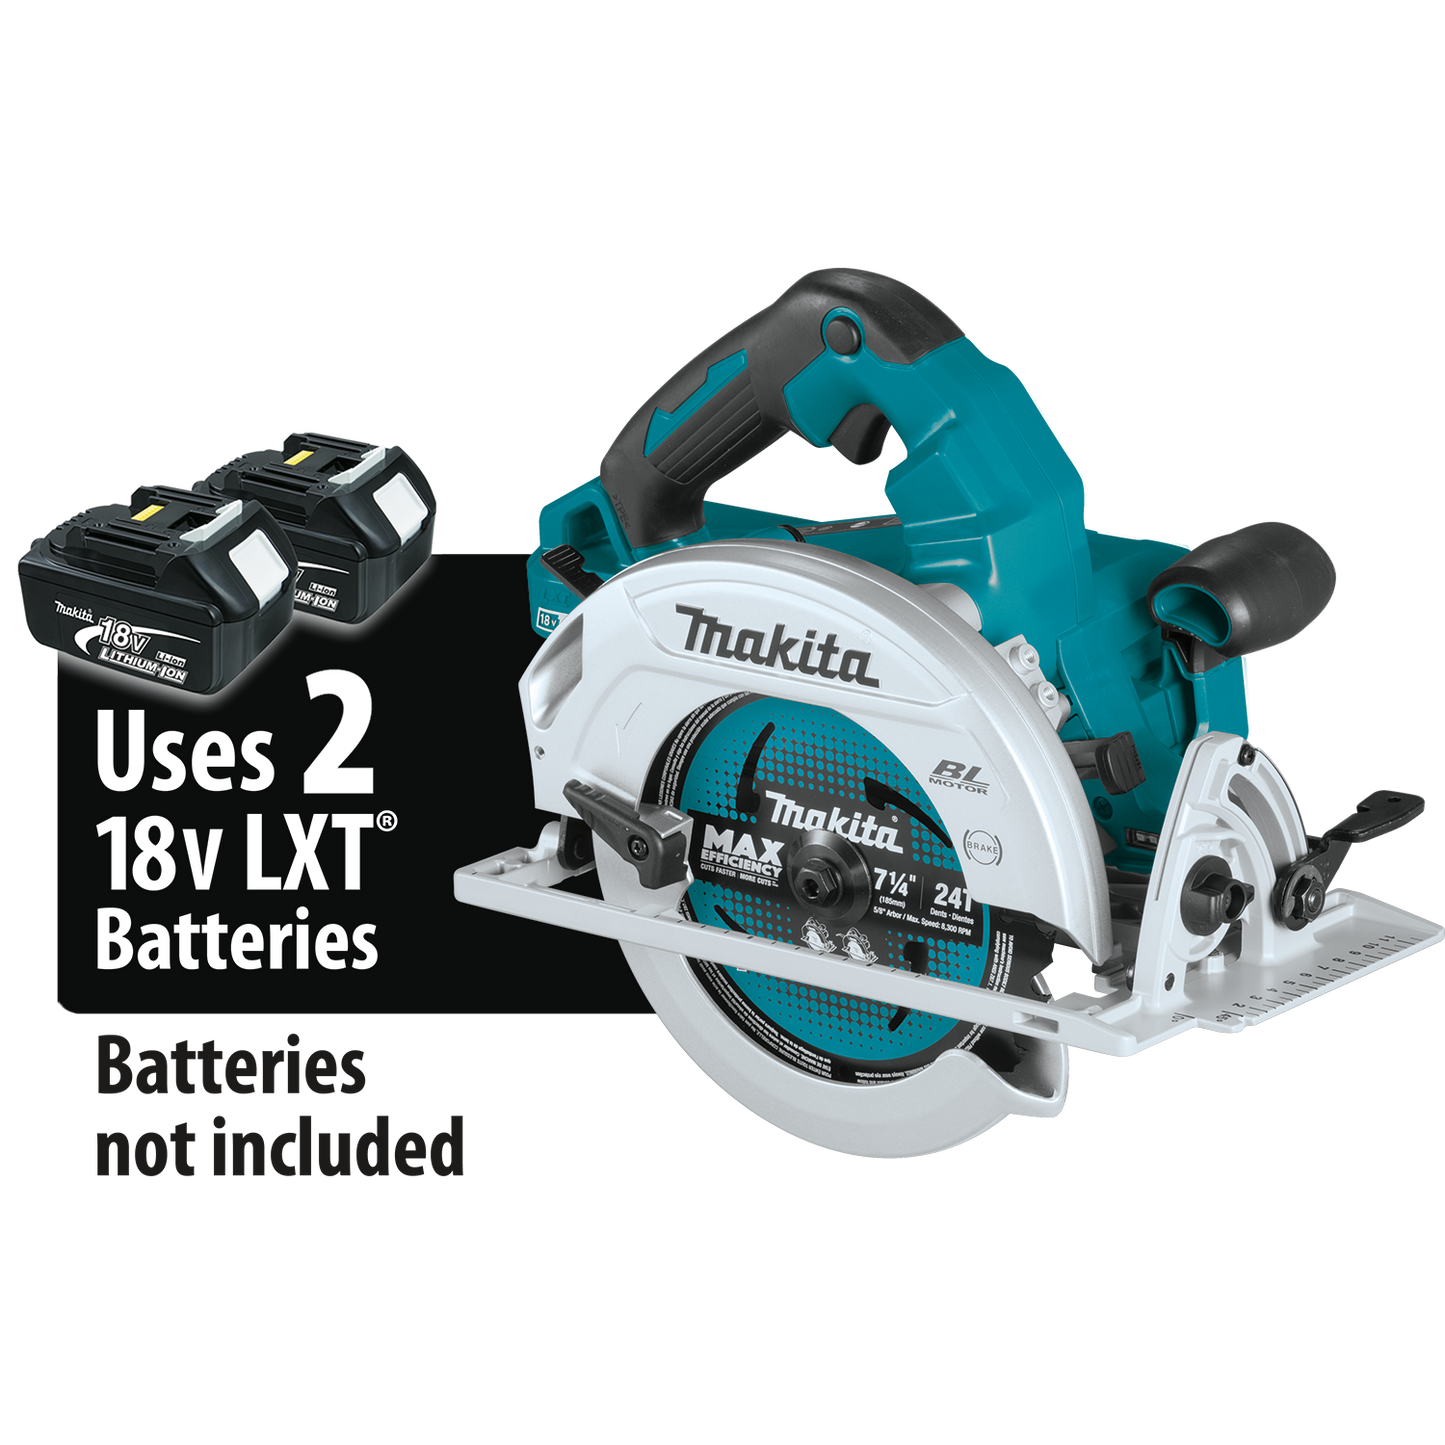 Makita 36 Volt LXT Brushless 7 1/4 Inch Circular Saw Factory Serviced (Tool Only)